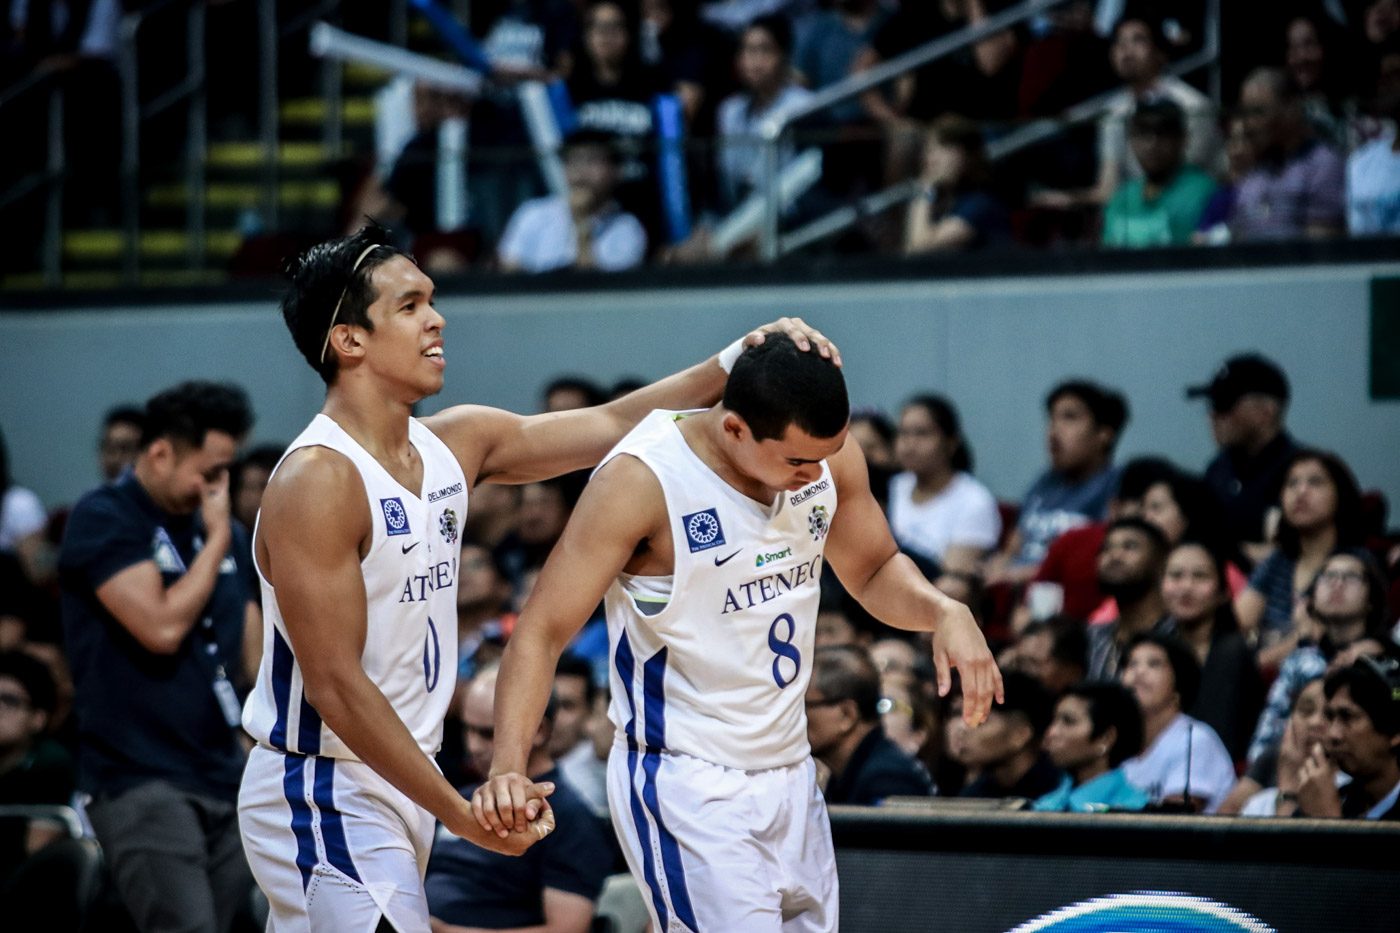 Disqualified from MVP race, Ravena sets sights on crown